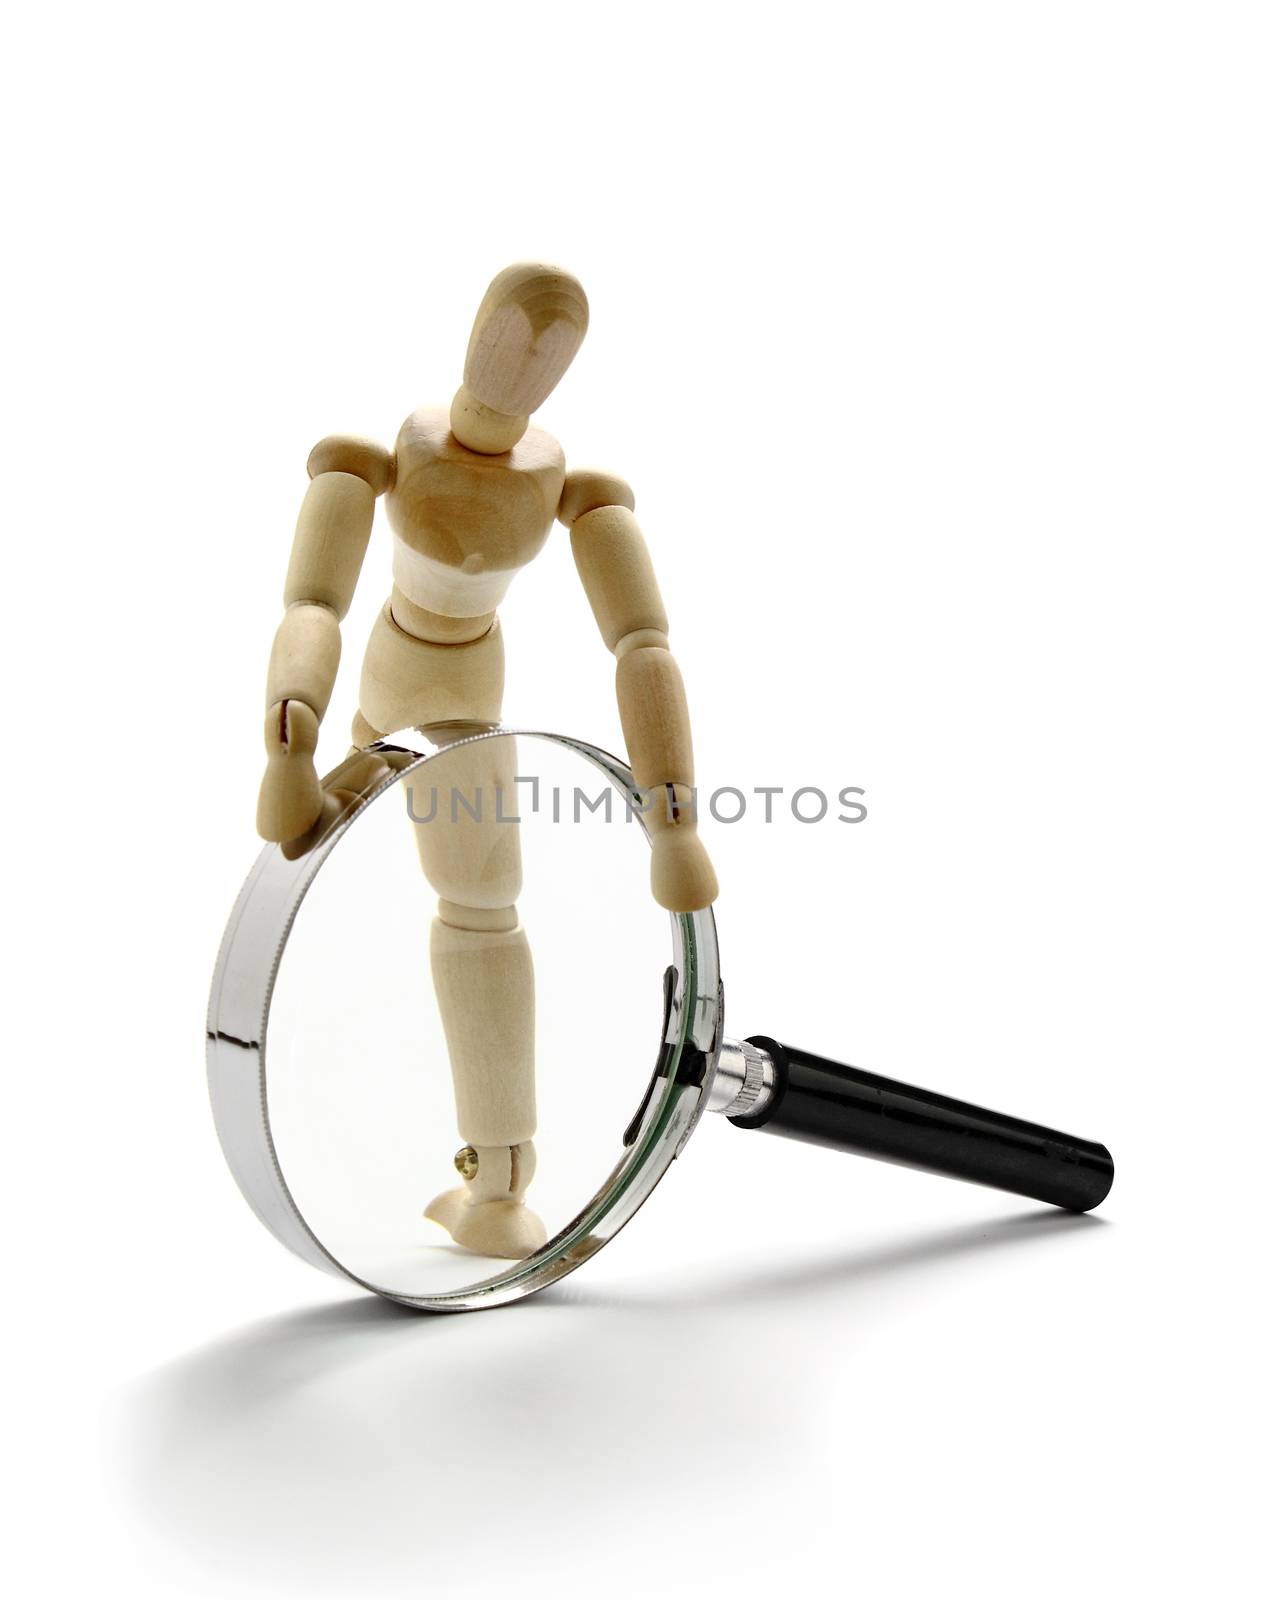 Manikin and magnifier by dynamicfoto